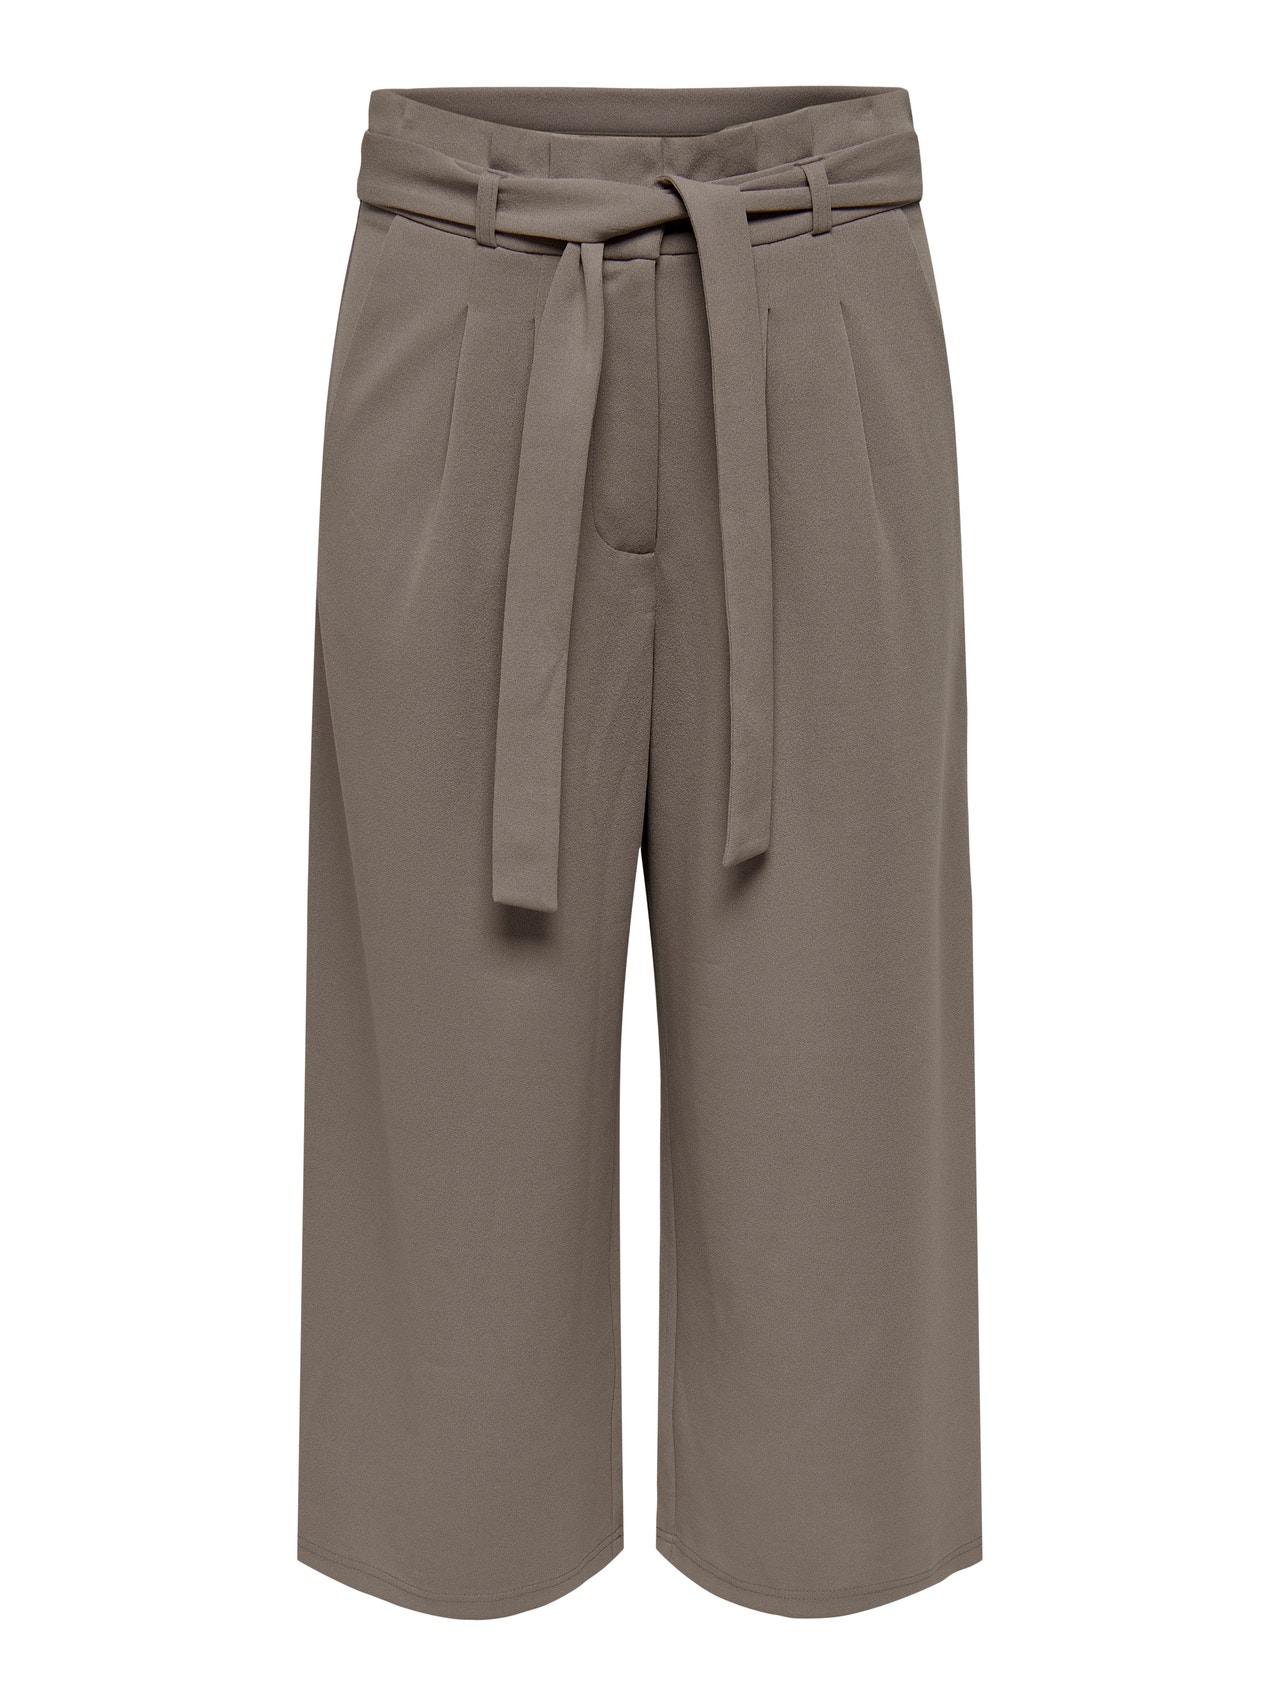 ONLY Culotte Trousers -Driftwood - 15205538